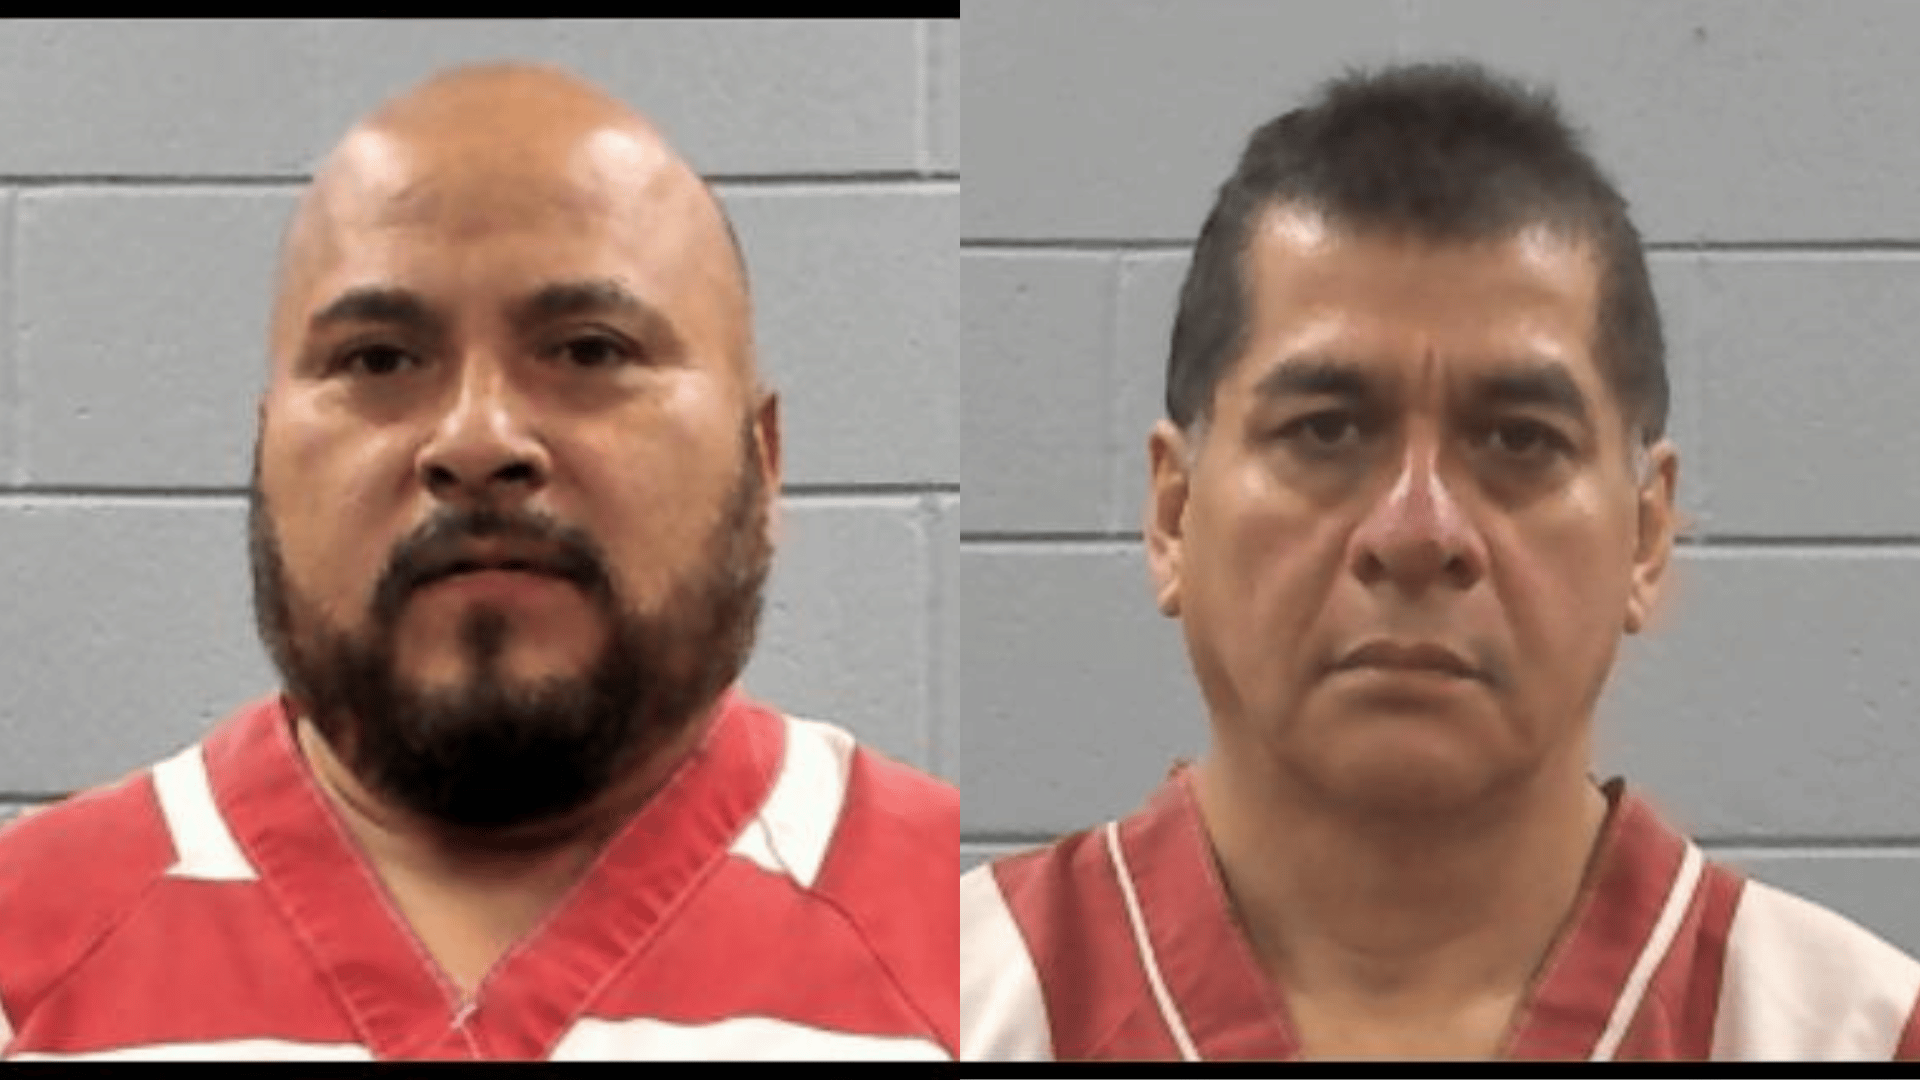 Roughly 97 pounds of cocaine seized by Rankin County deputies, 2 men